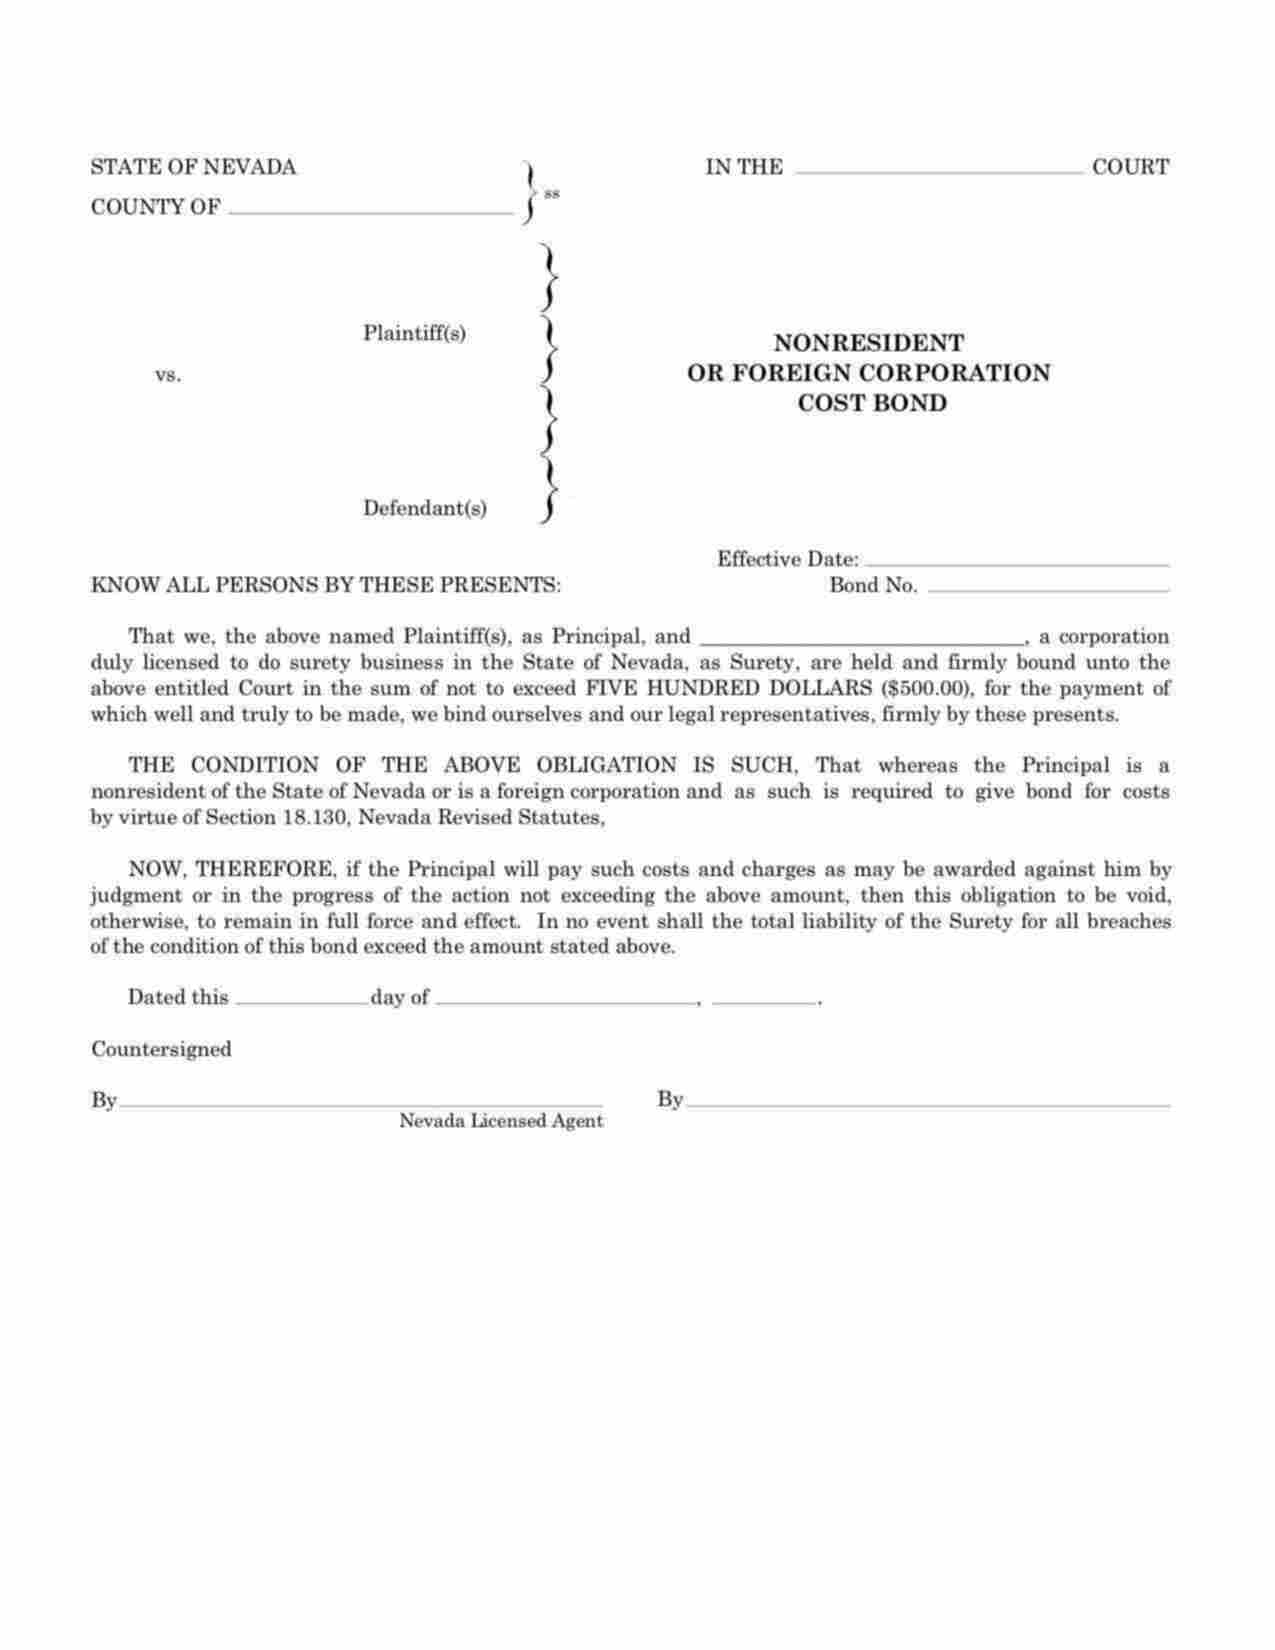 Nevada Nonresident or Foreign Corporation Cost Bond Form